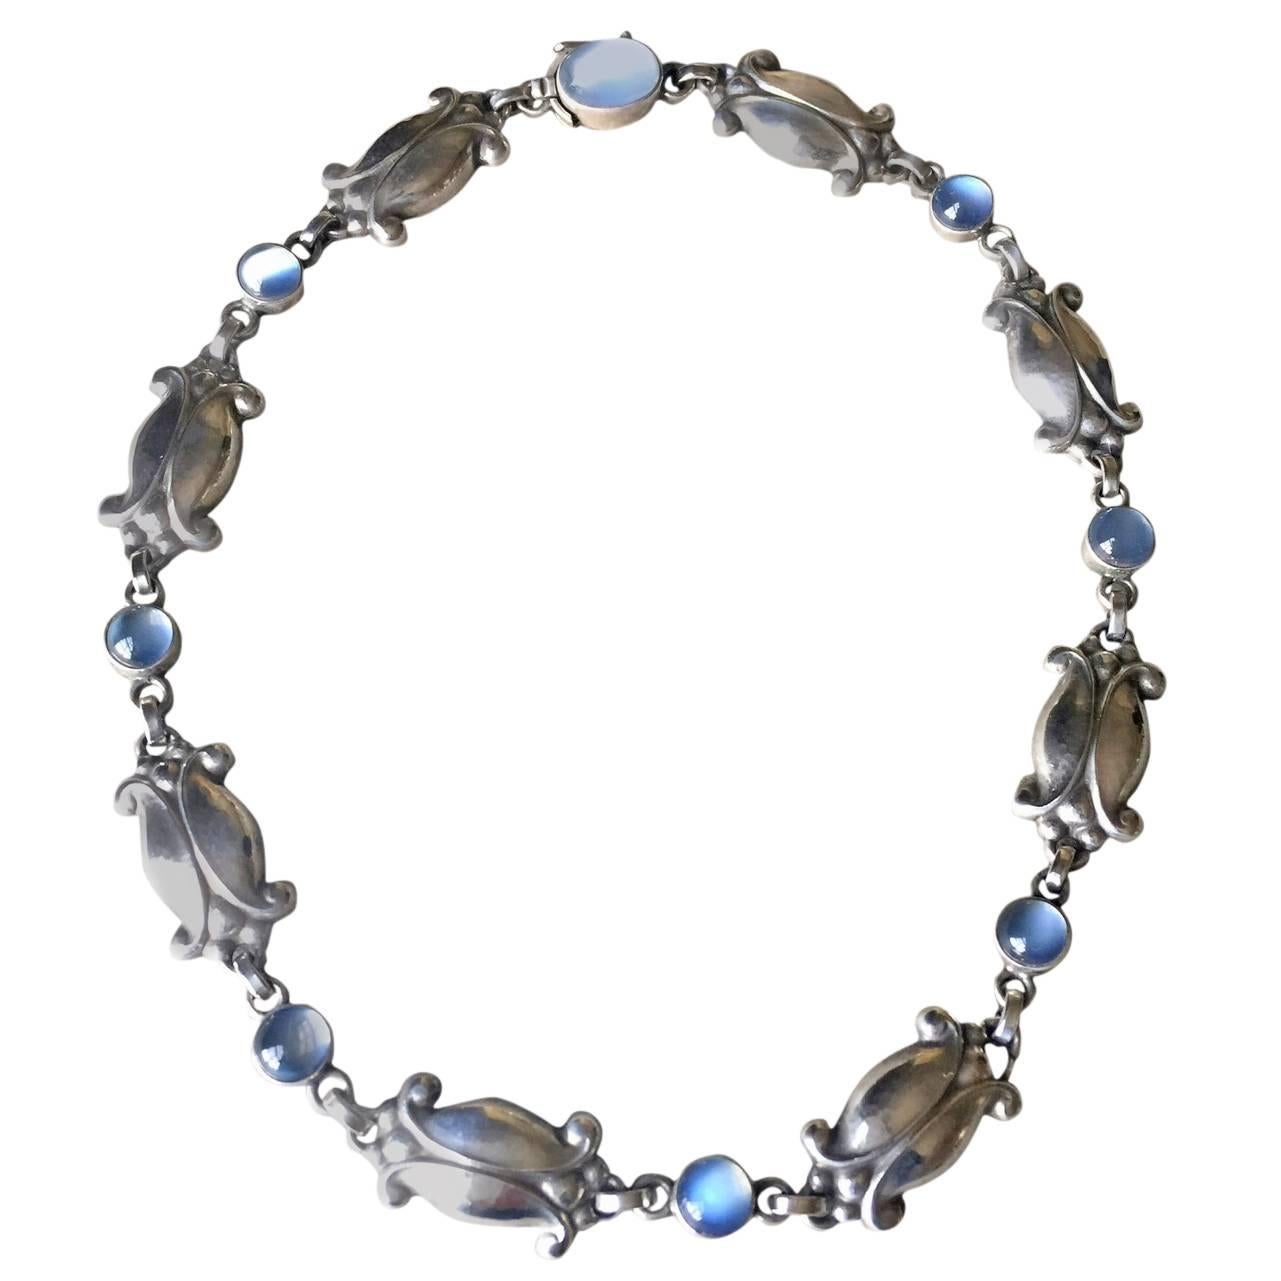 Georg Jensen Sterling Silver Necklace No. 15 with Moonstones